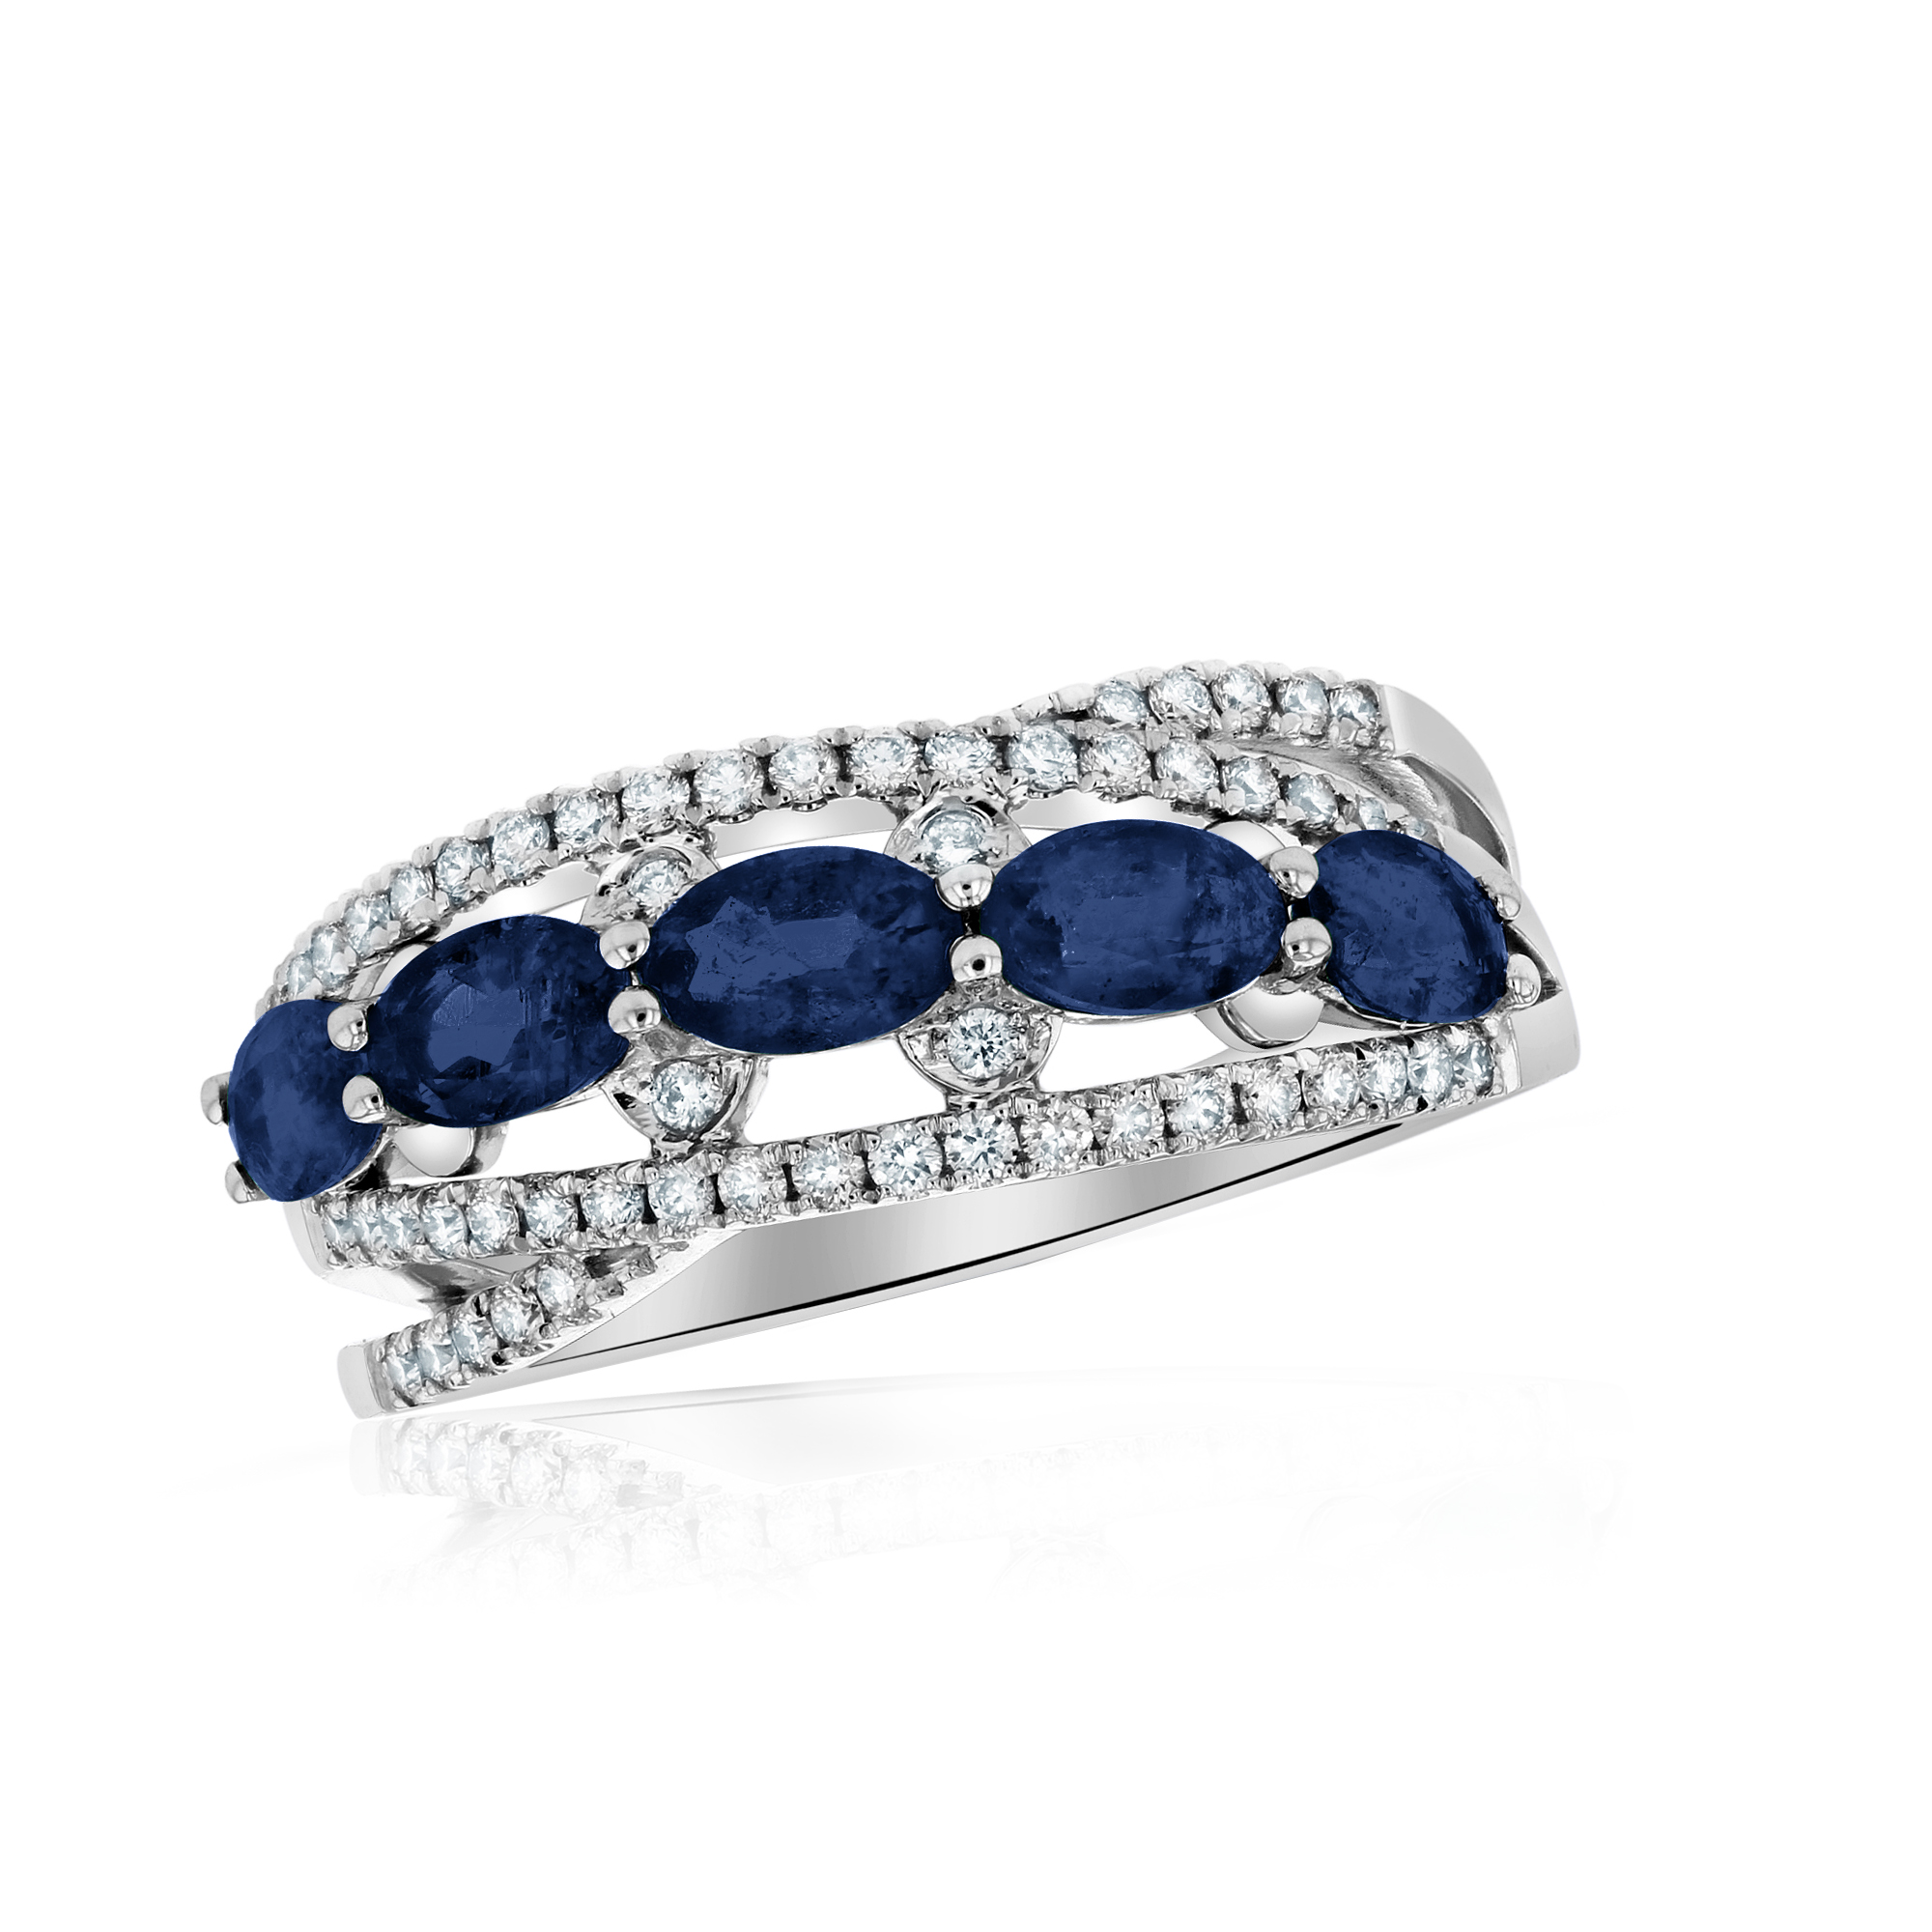 1.81ctw Diamond and Sapphire Ring in 14k White Gold